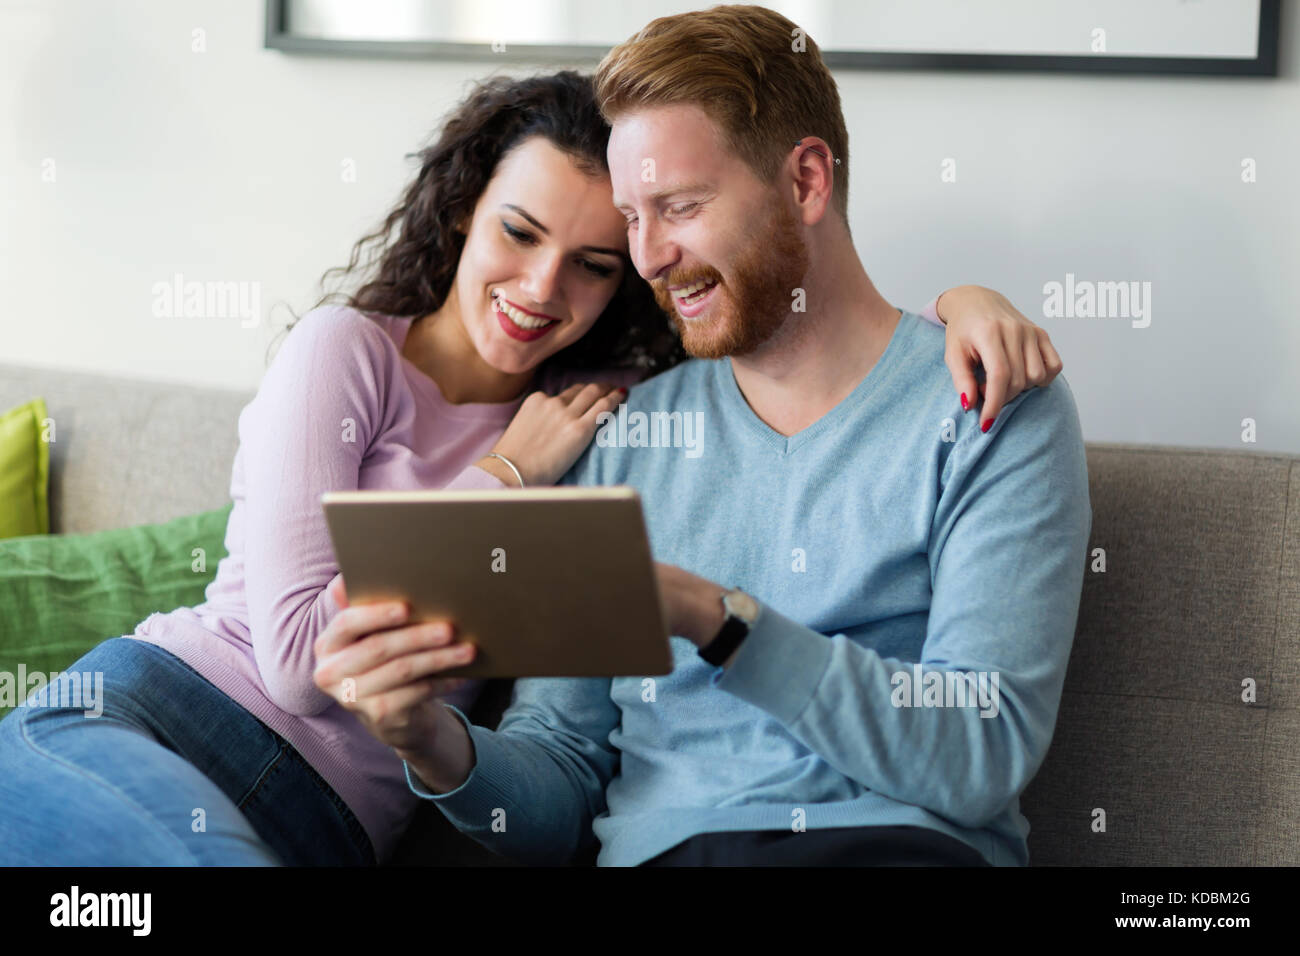 Young couple using digital tablet at home Stock Photo